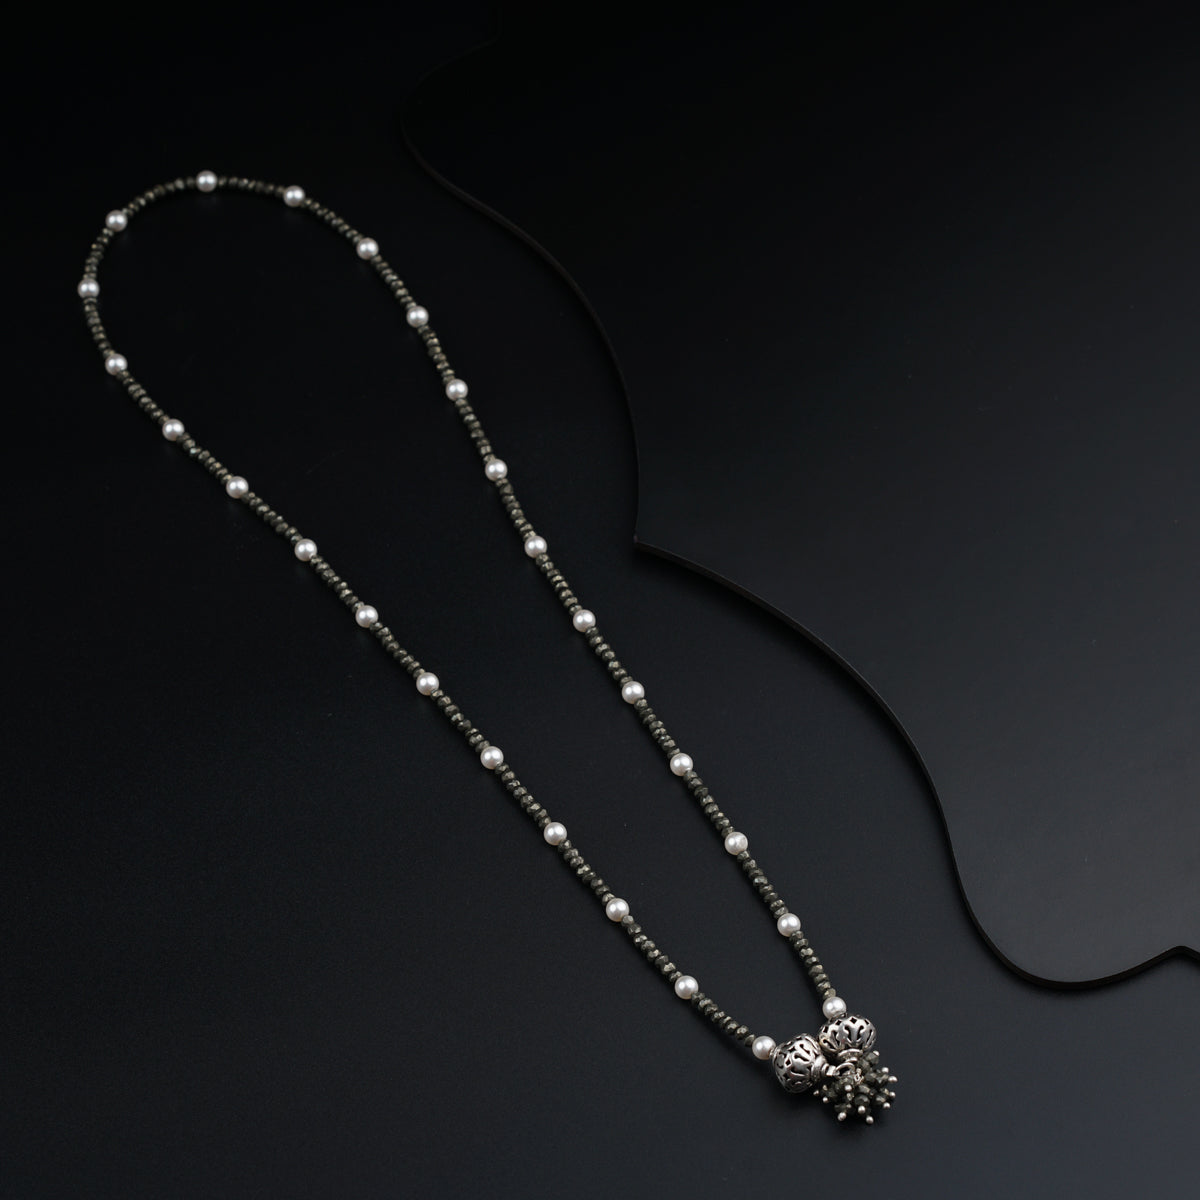 Silver Necklace with Pyrite Pearls